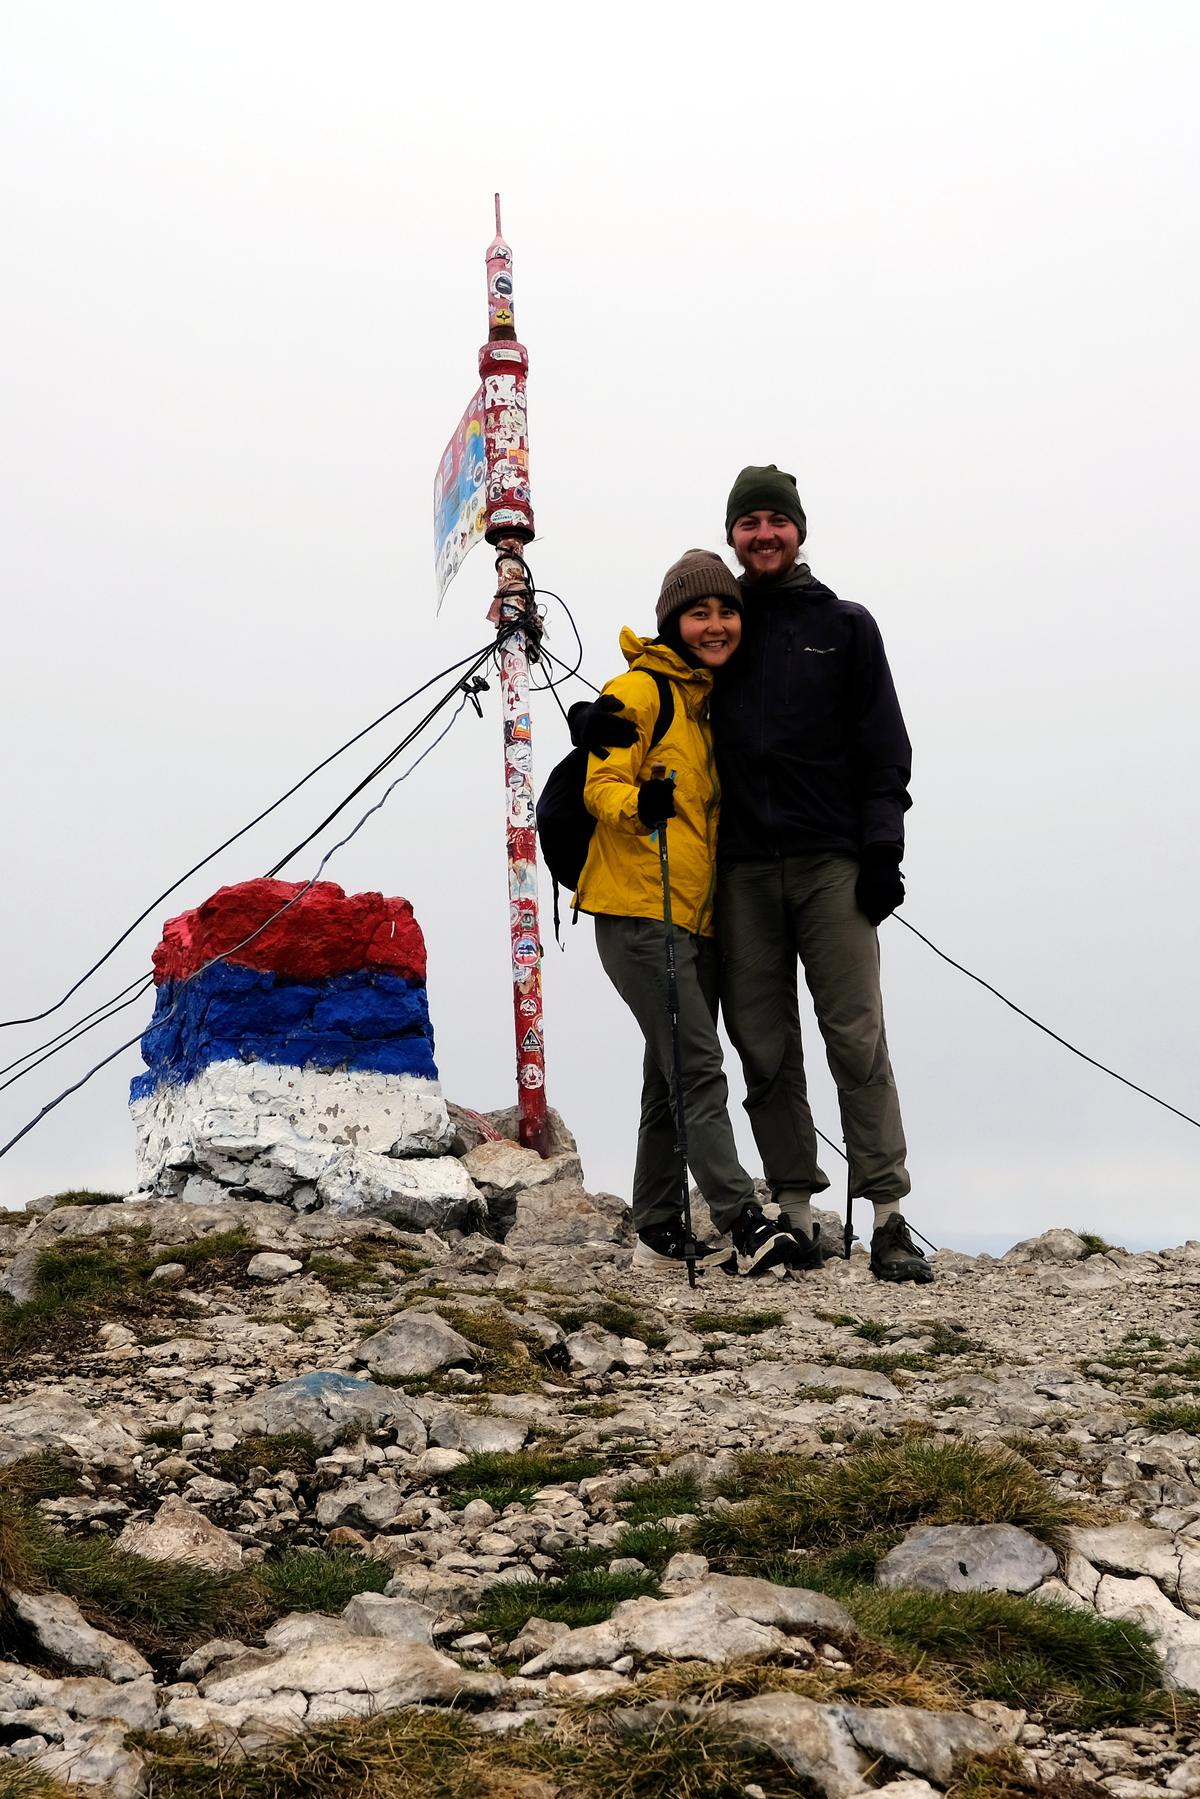 Mizuki and I stood at the top of Maglic, back in Bosnia for just a moment.